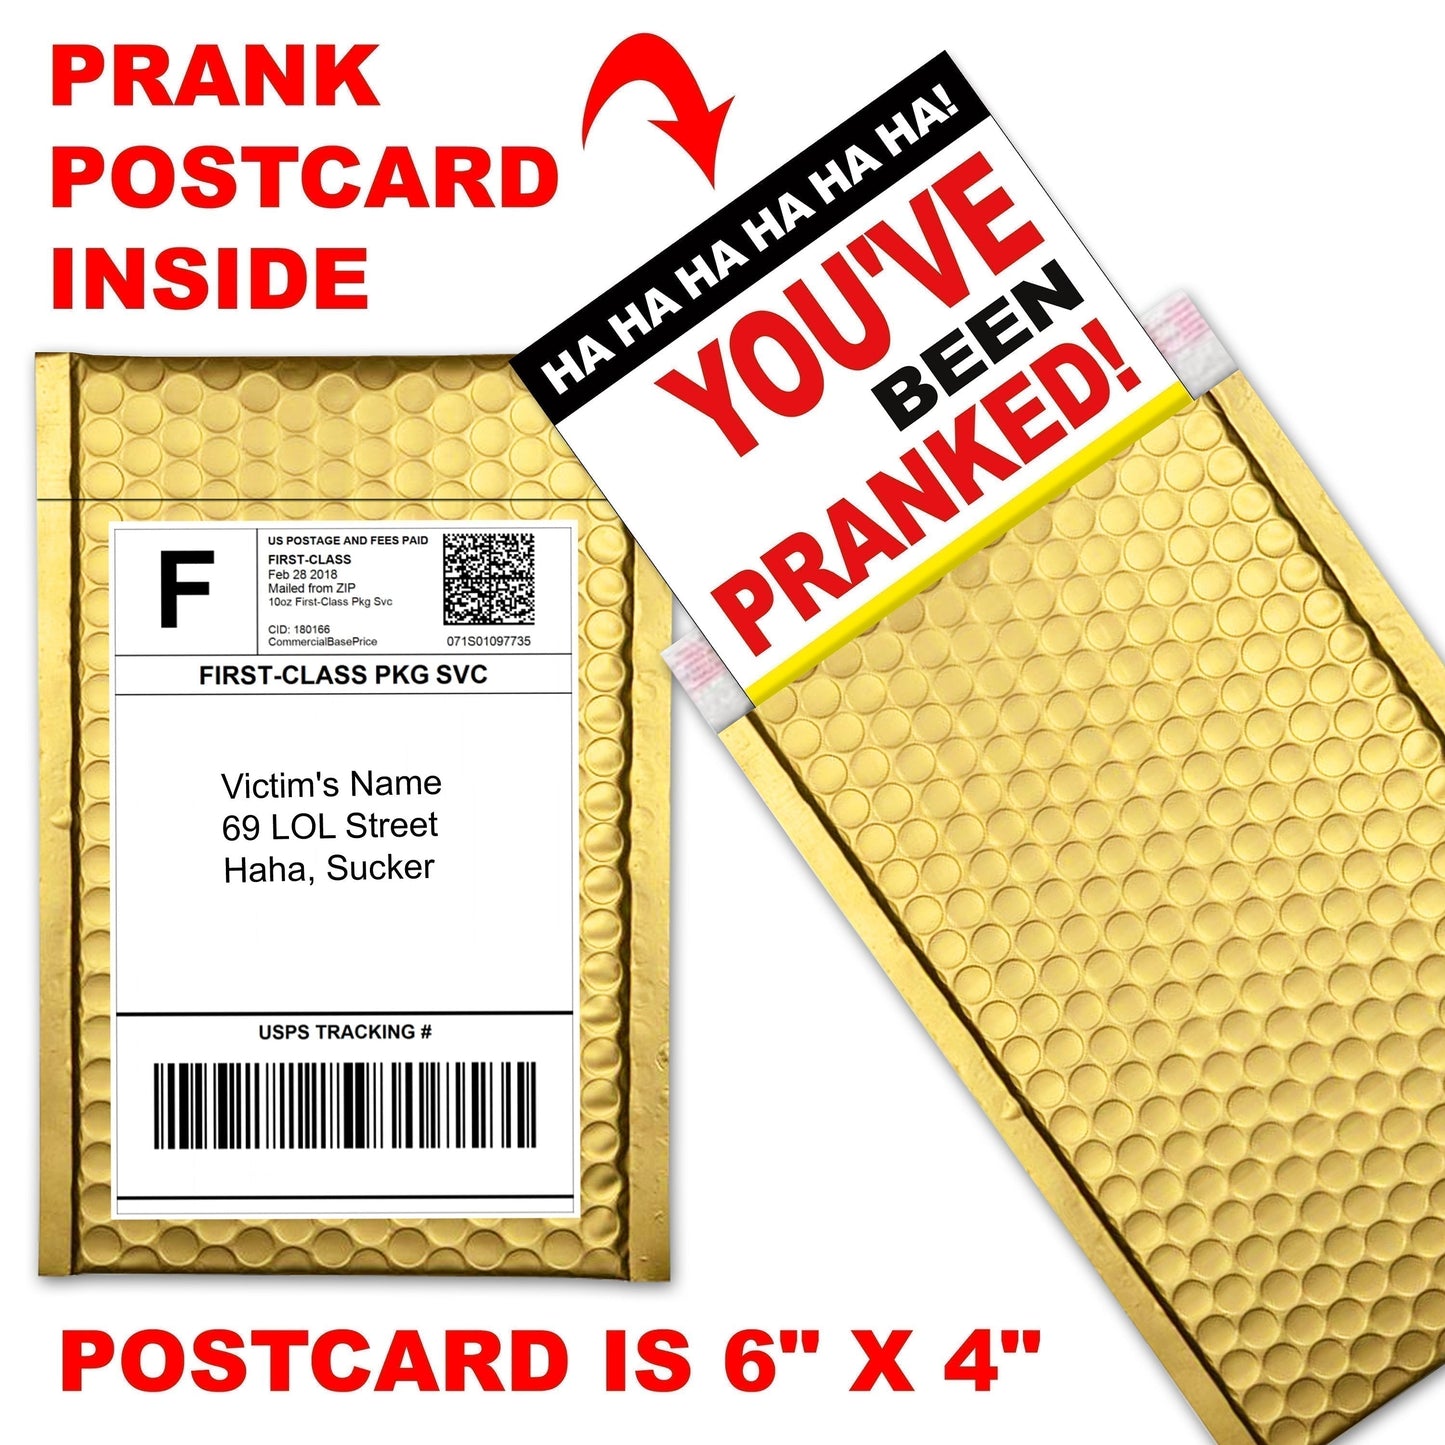 Gray Down There embarrassing prank envelope gets mailed directly to your victims 100% anonymously!